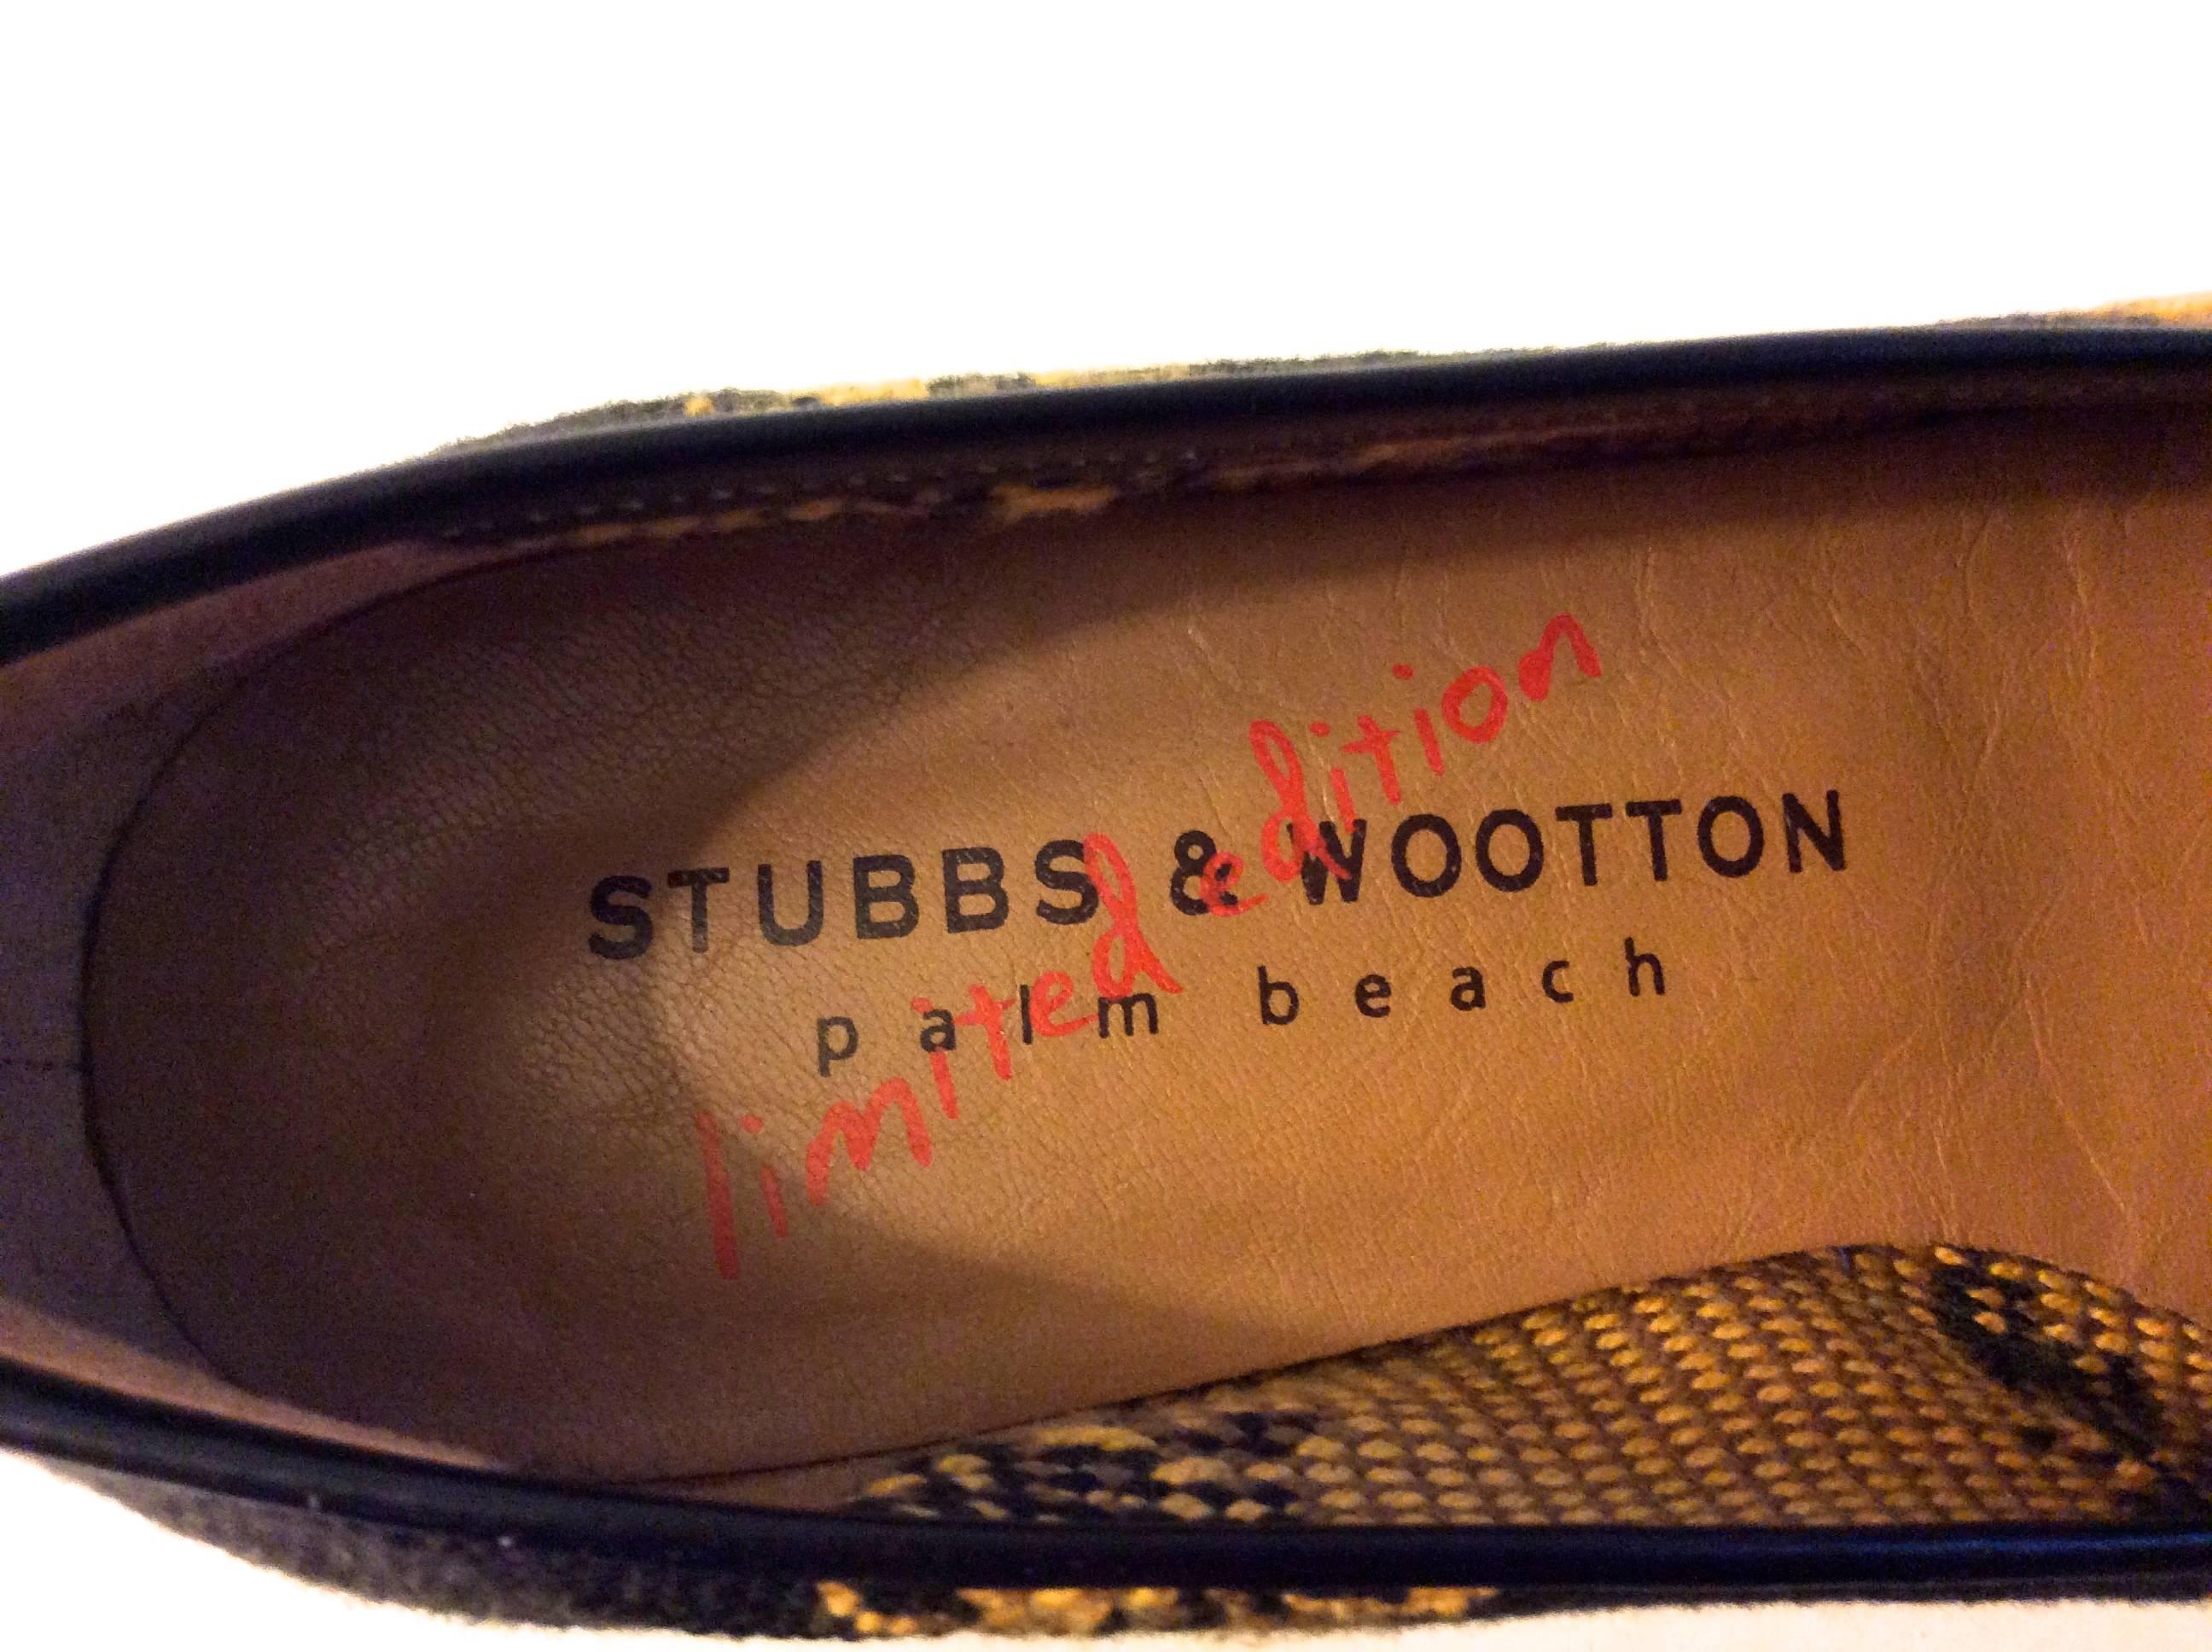 New Stubbs and Wooton Shoes - Size 7.5 - Limited Edition 2